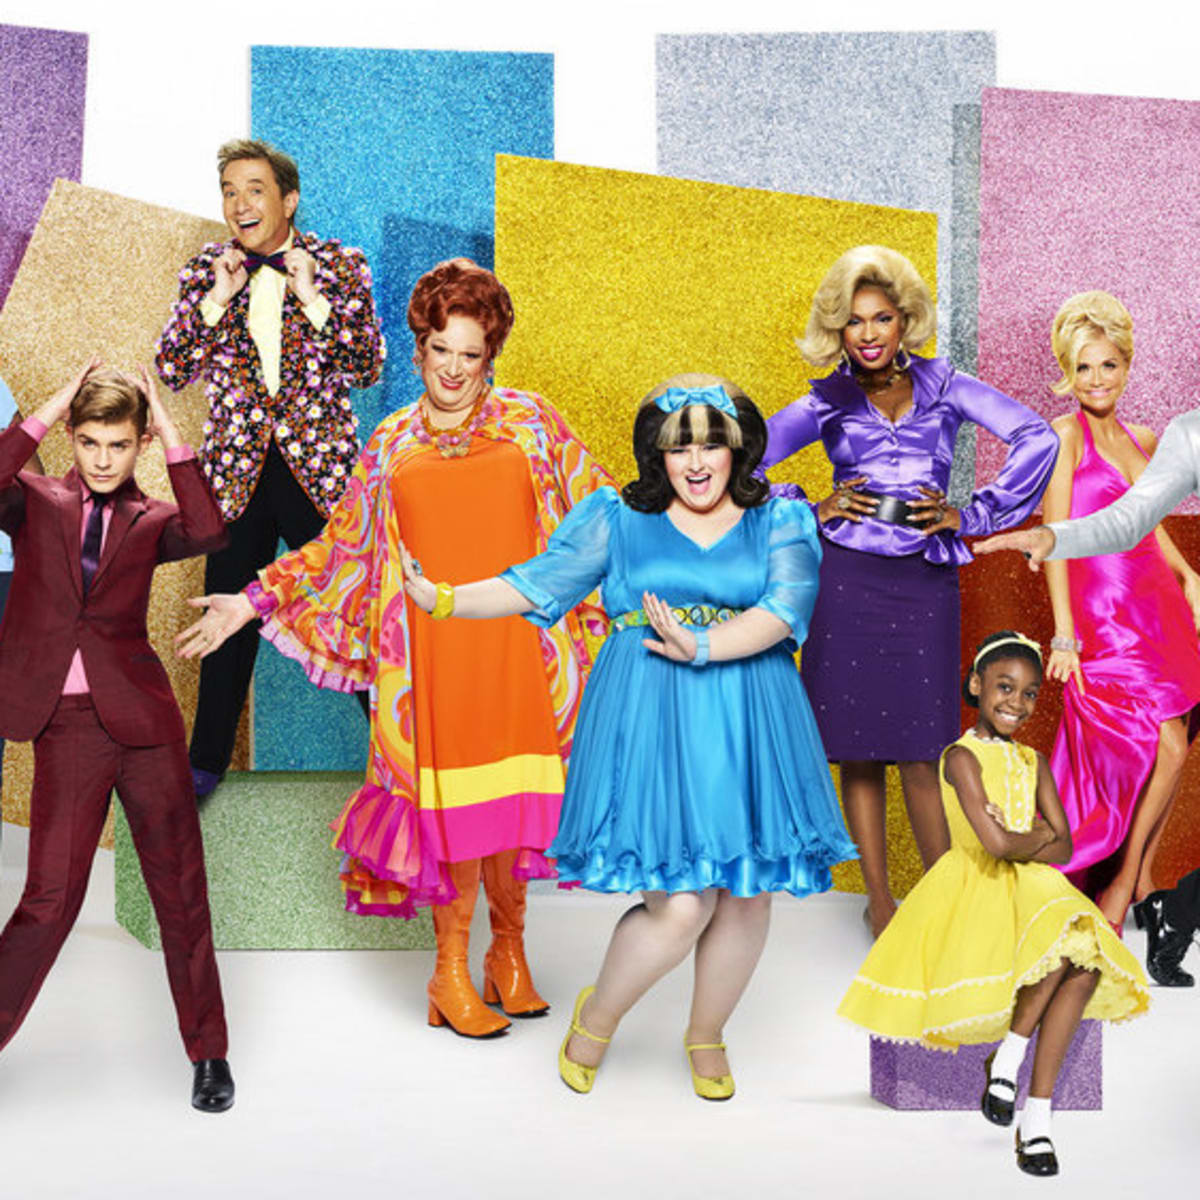 How To Watch Hairspray Online For Free